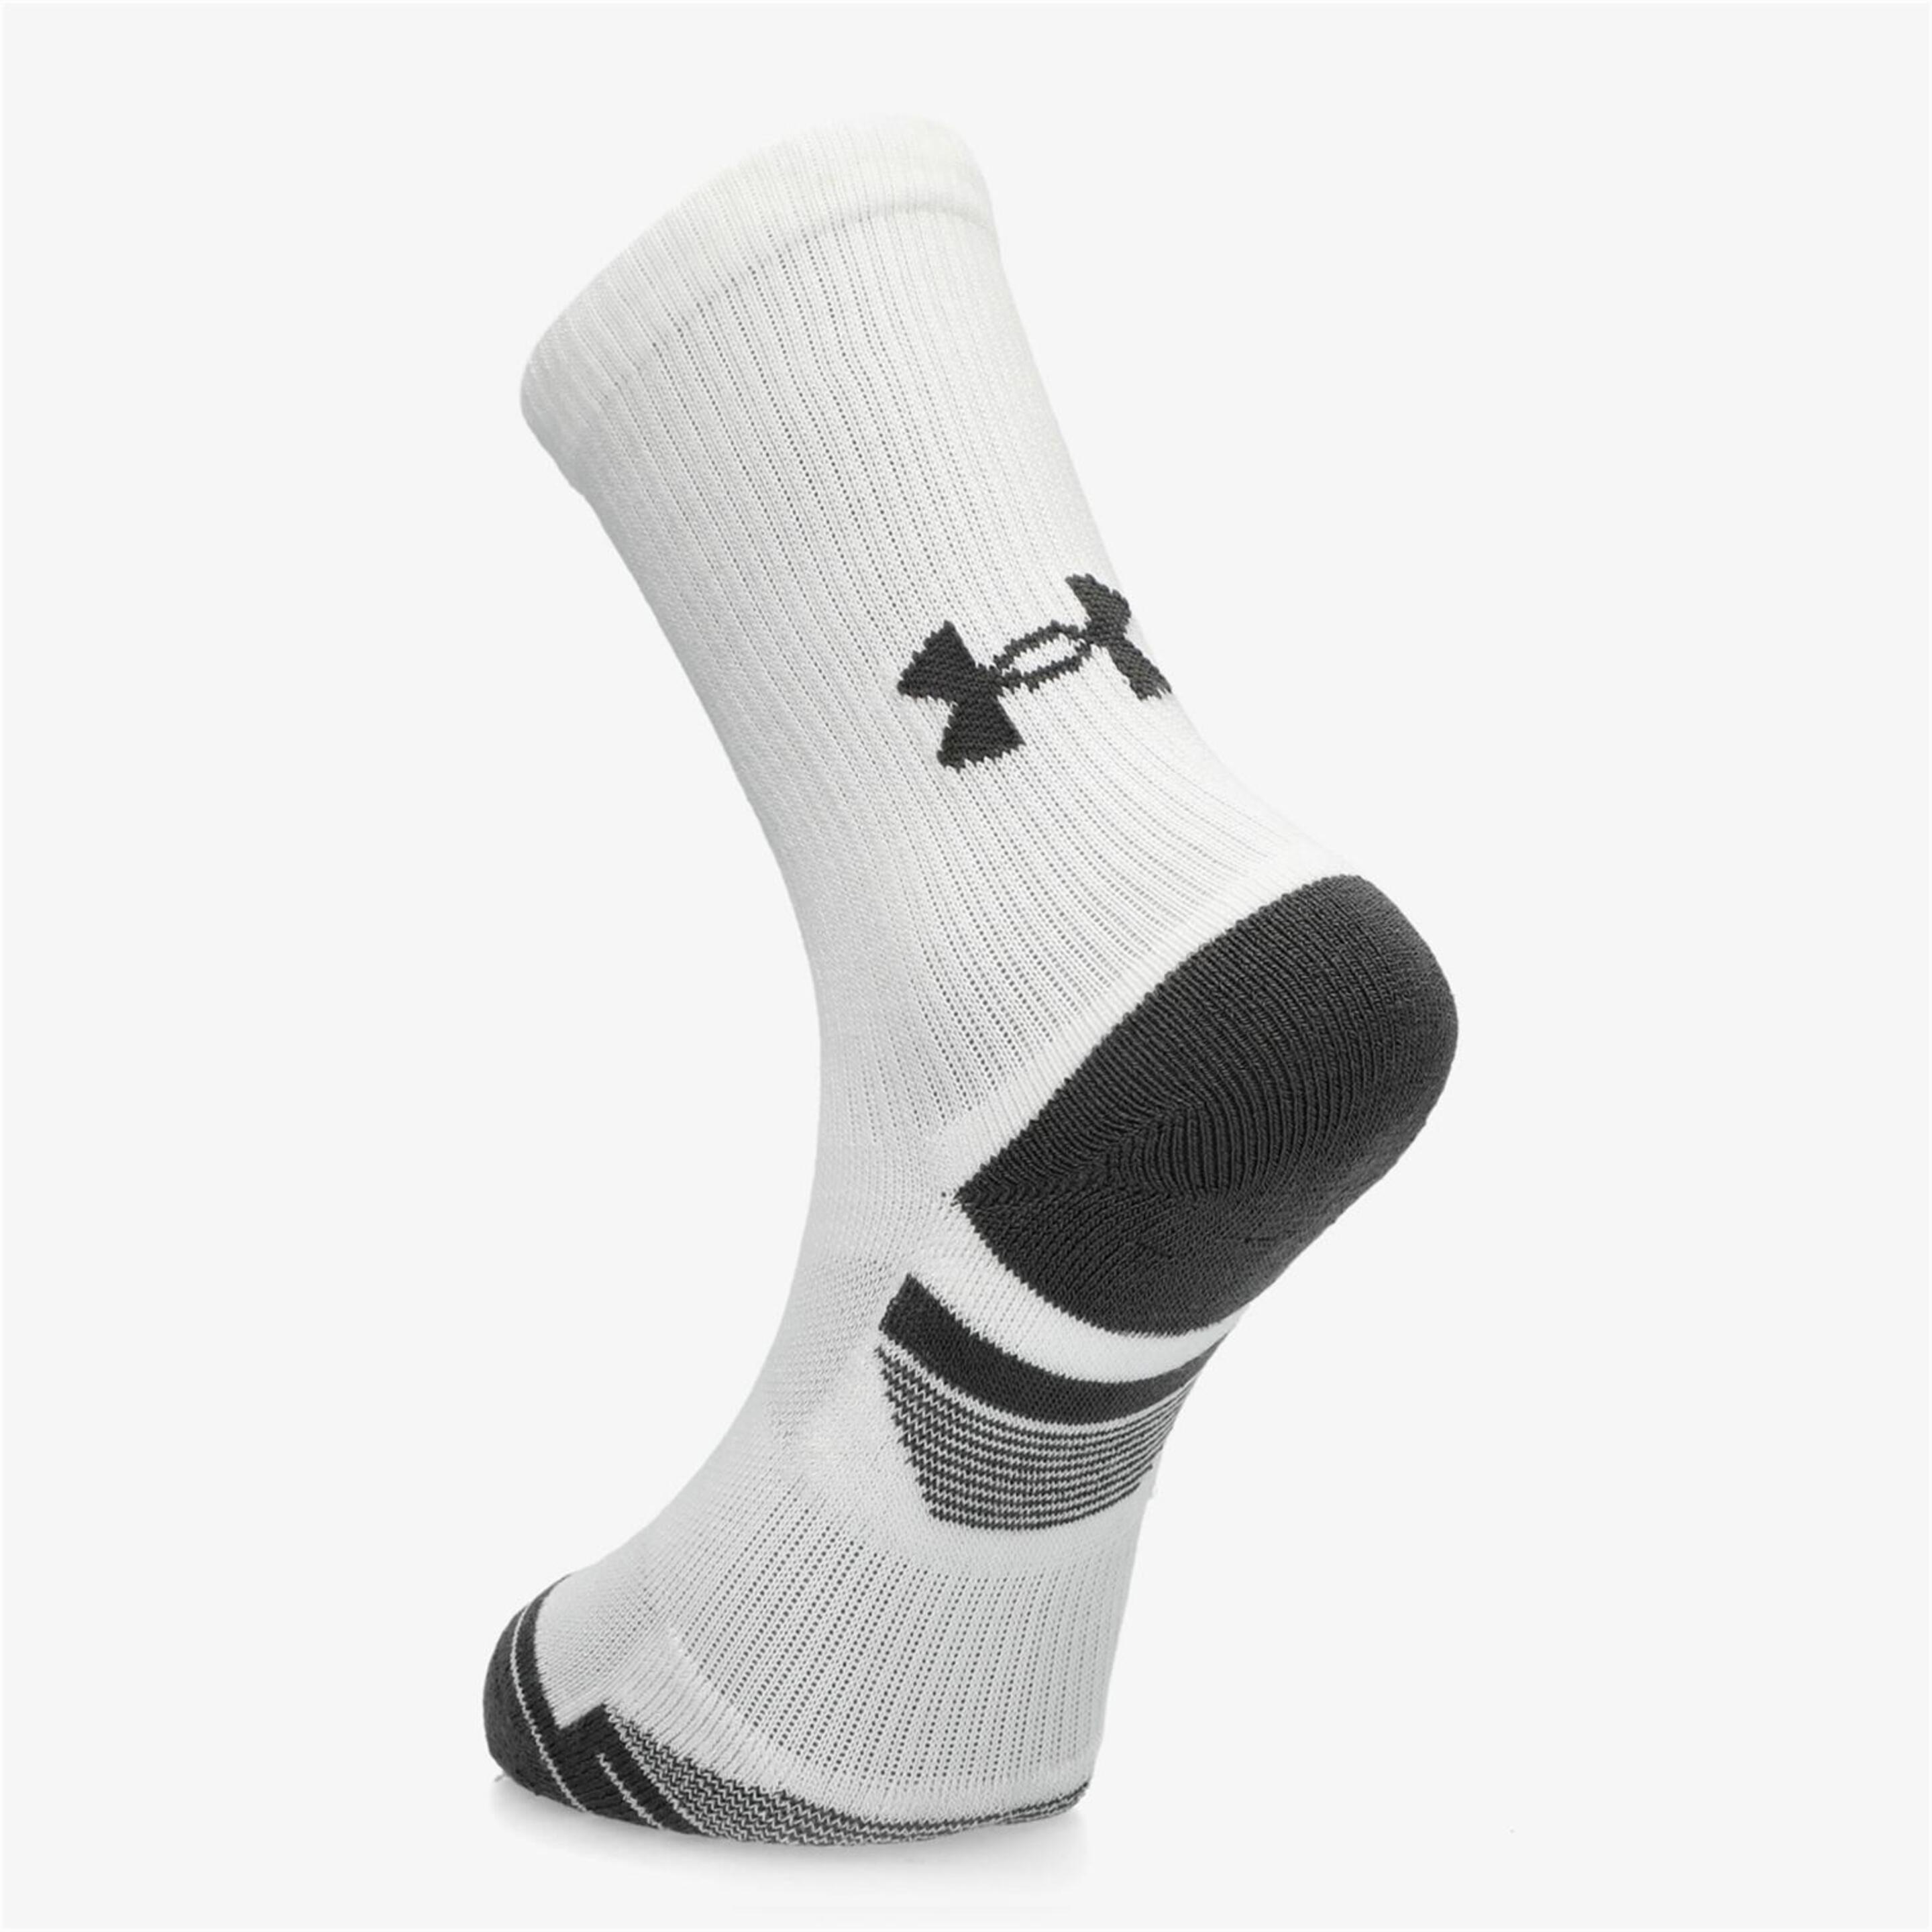 Under Armour Performance Tech - Blanco - Calcetines